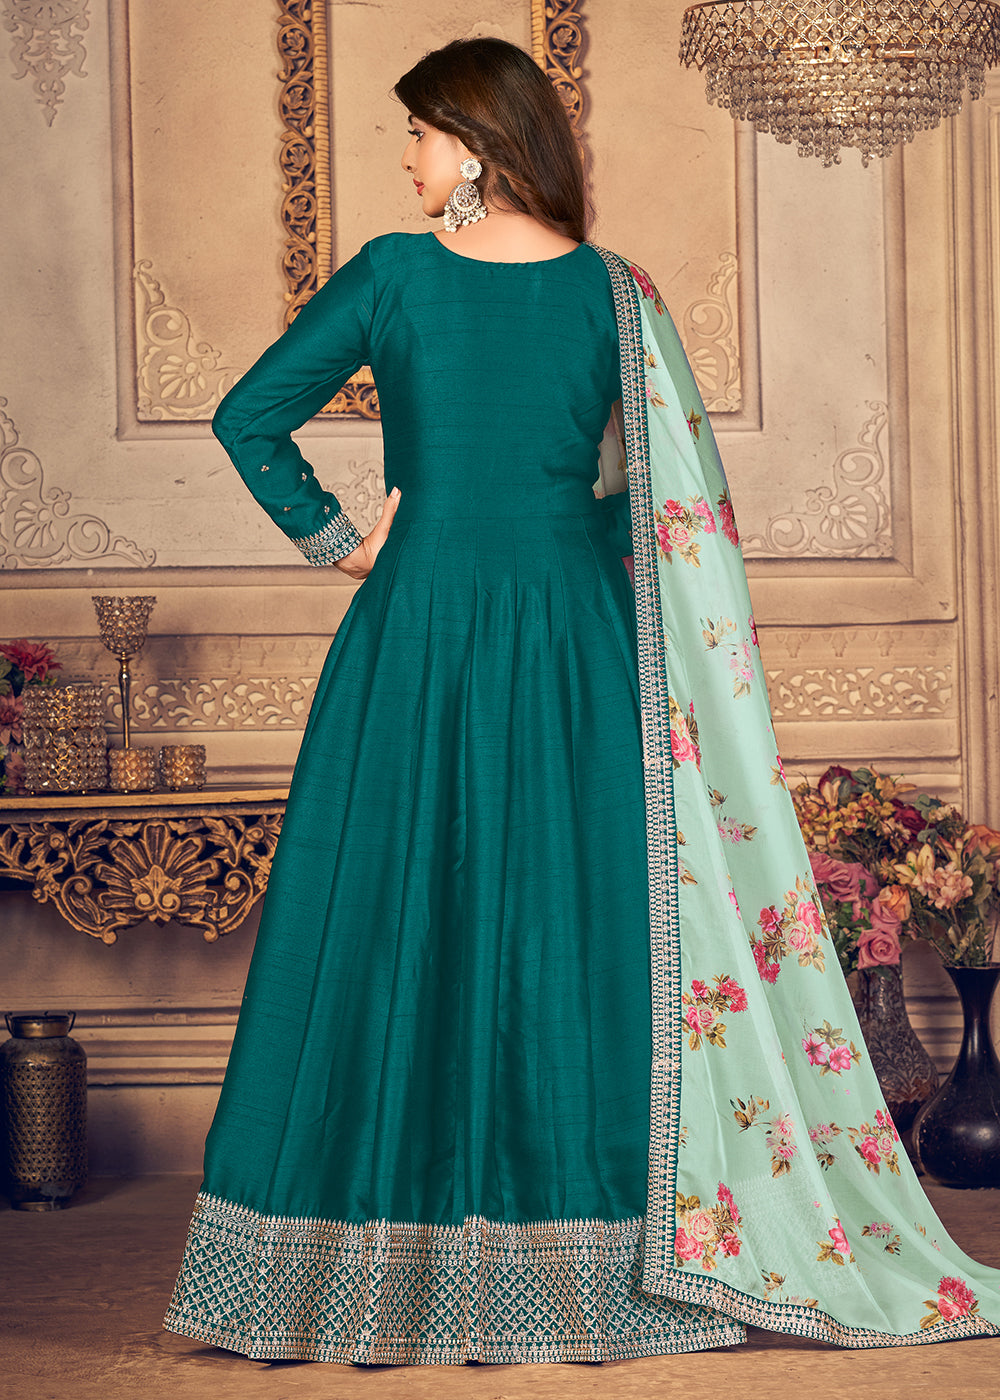 Buy Now Teal Green Silk Beautifully Embroidered Floor Length Anarkali Suit Online in Canada at Empress Clothing.